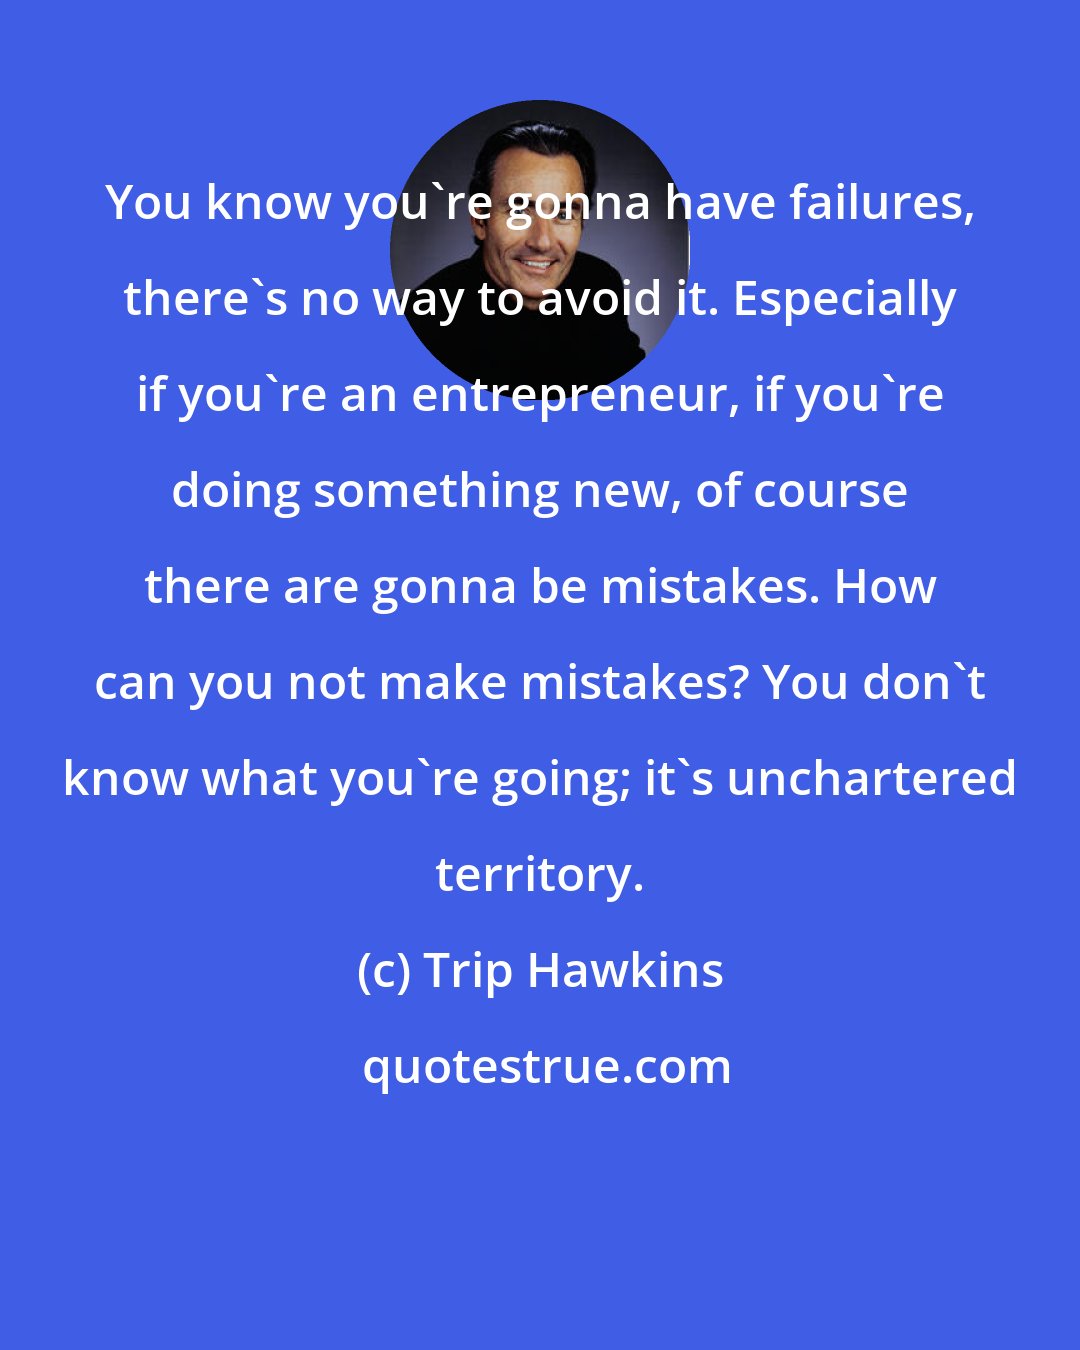 Trip Hawkins: You know you're gonna have failures, there's no way to avoid it. Especially if you're an entrepreneur, if you're doing something new, of course there are gonna be mistakes. How can you not make mistakes? You don't know what you're going; it's unchartered territory.